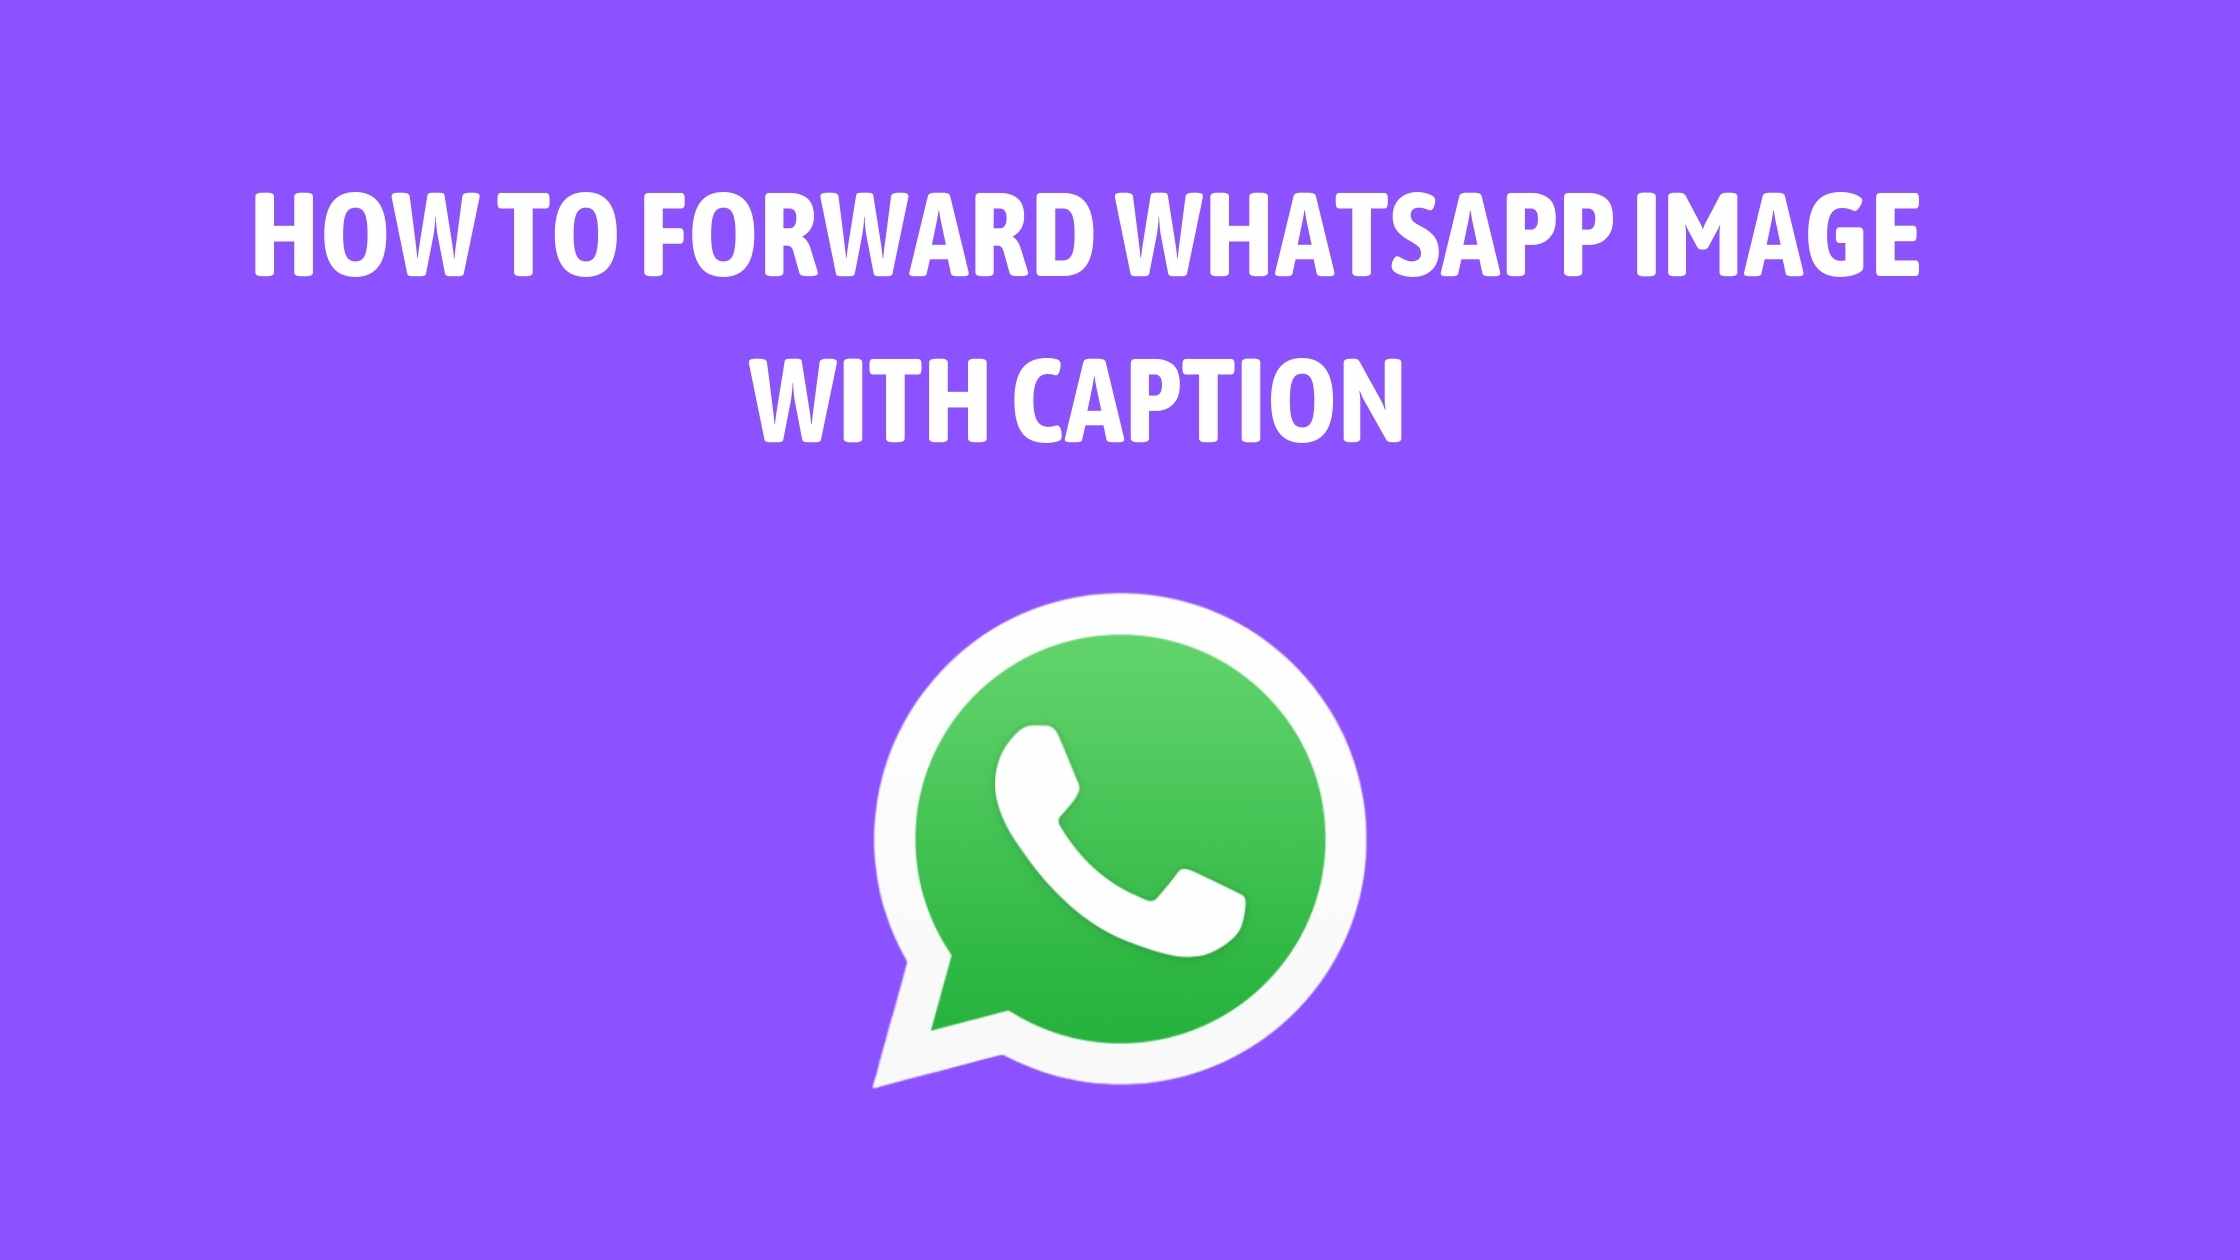 how to forward whatsapp image with caption on android